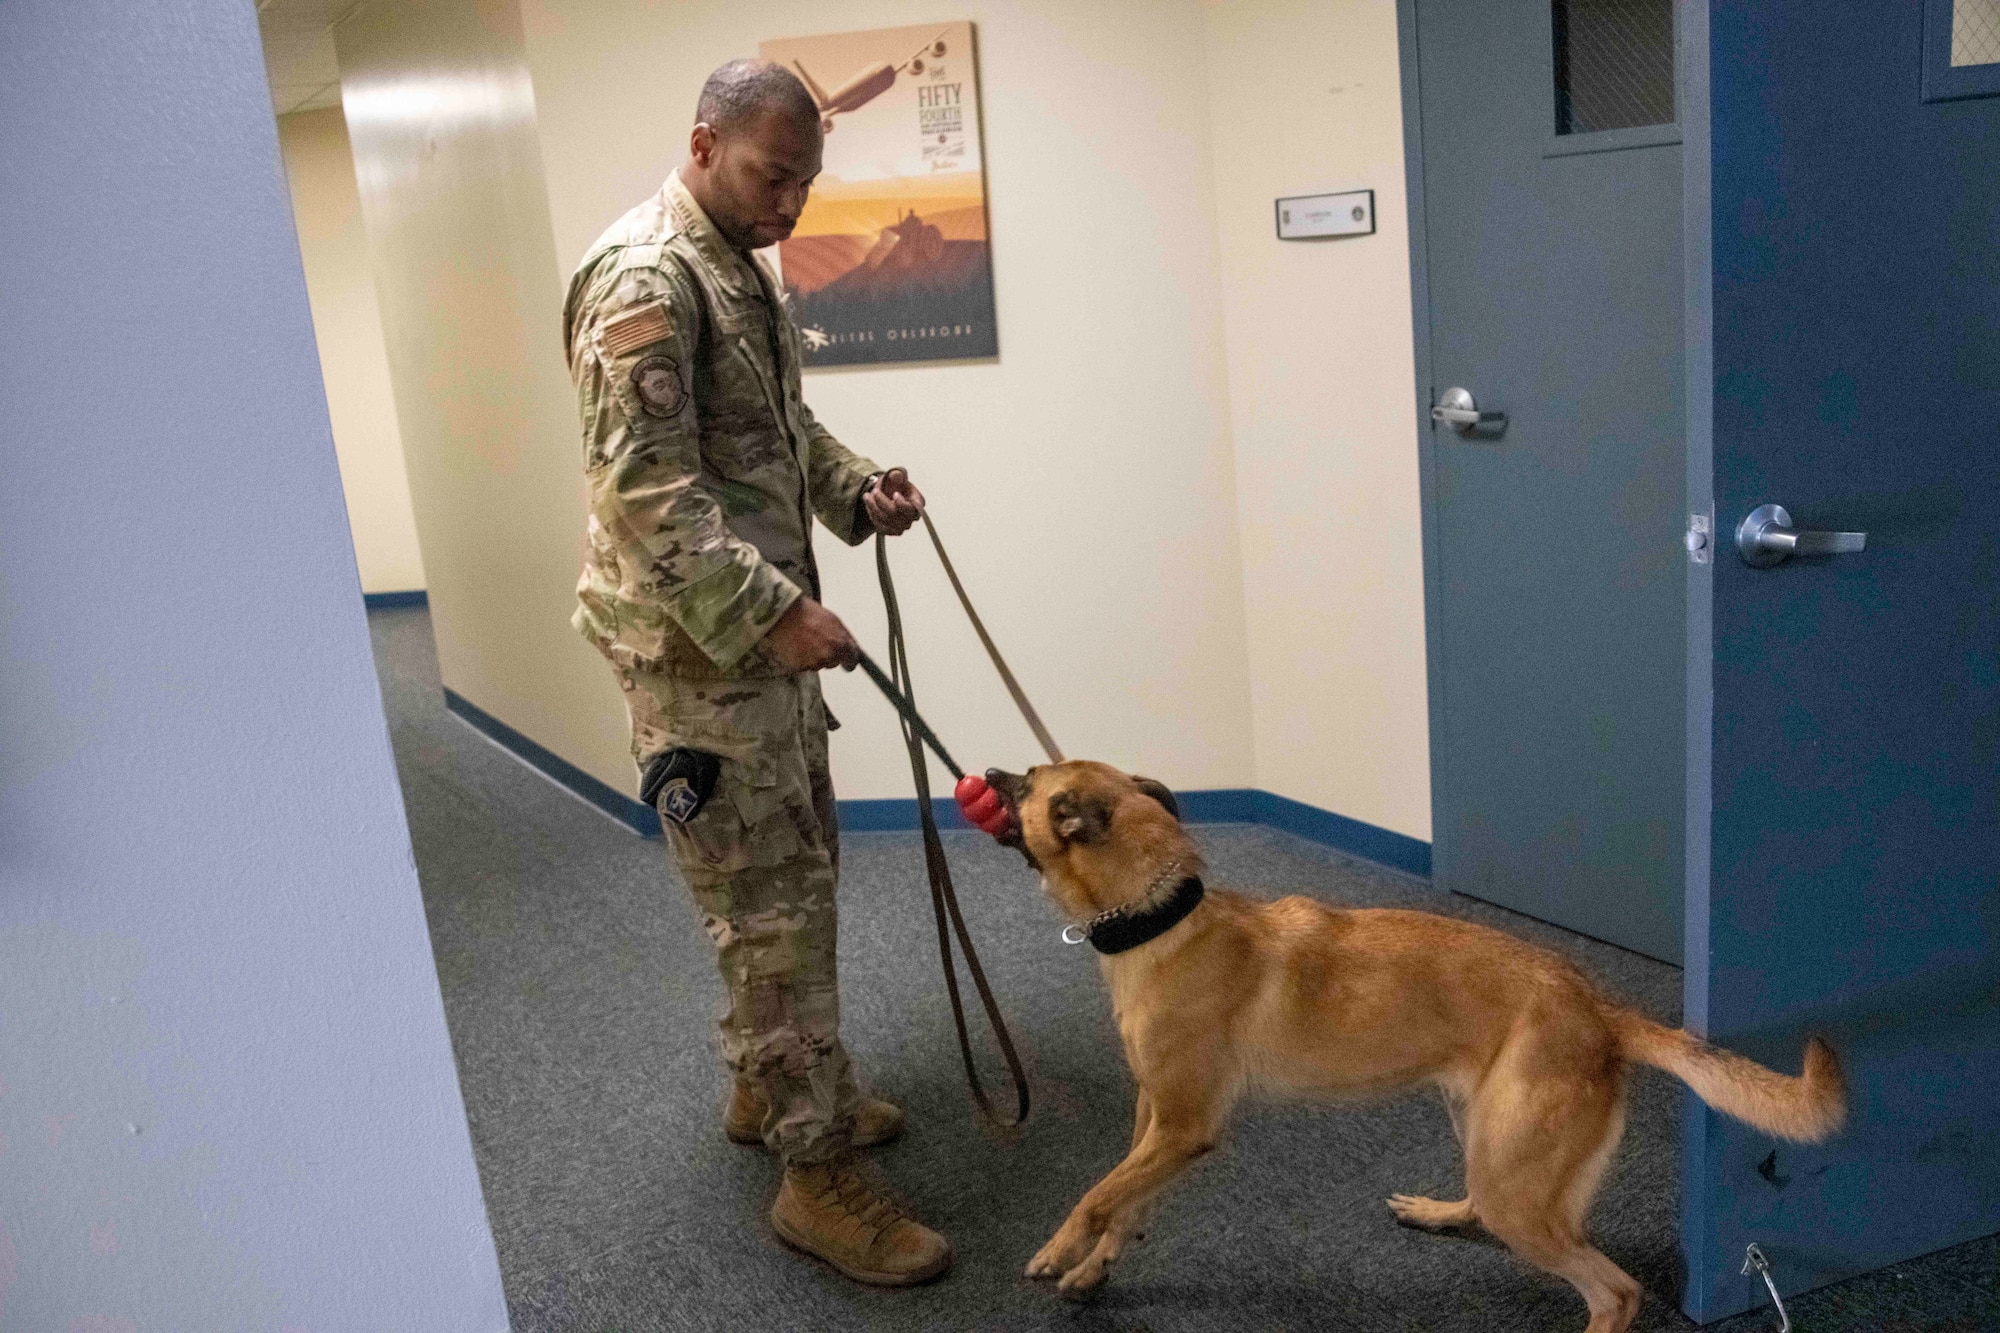 U.S. Air Force Staff Sgt. DeAndre Turner, 97th Security Forces Squadron Military Working Dog (MWD) handler, commands MWD “Bess” to release the training tool, at Altus Air Force Base, Oklahoma, July 28, 2021. To incentivize the dogs to find what they are looking for, they are given a toy after a successful task. (U.S. Air Force photo by Staff Sgt. Cody Dowell)